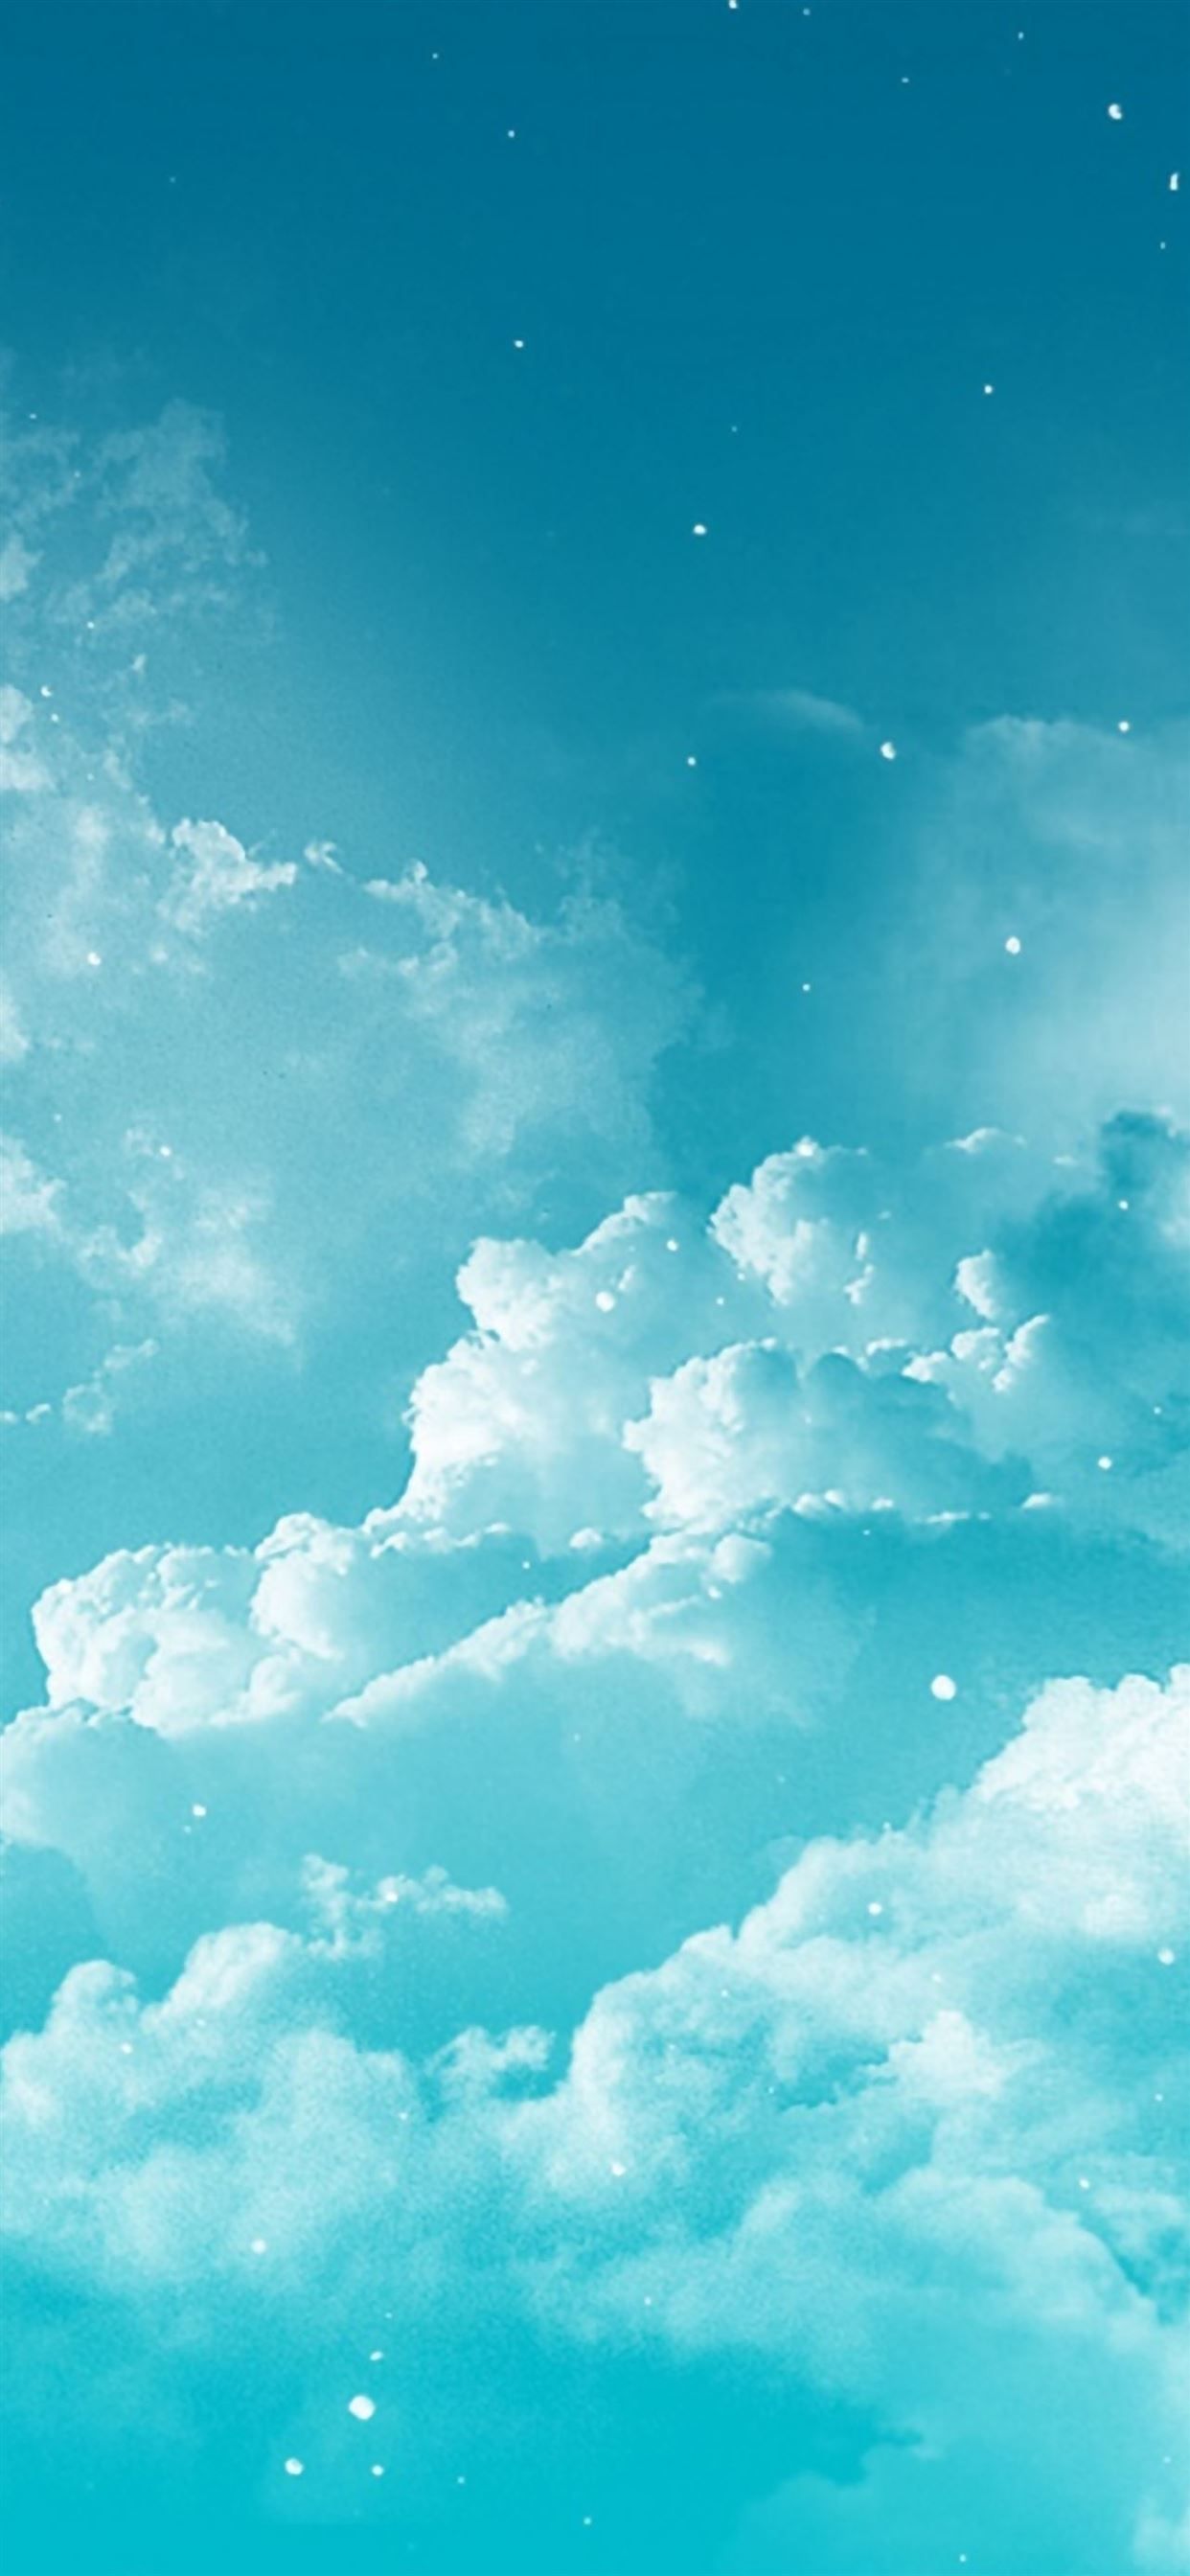 Aesthetic blue sky with white clouds and stars wallpaper - Turquoise